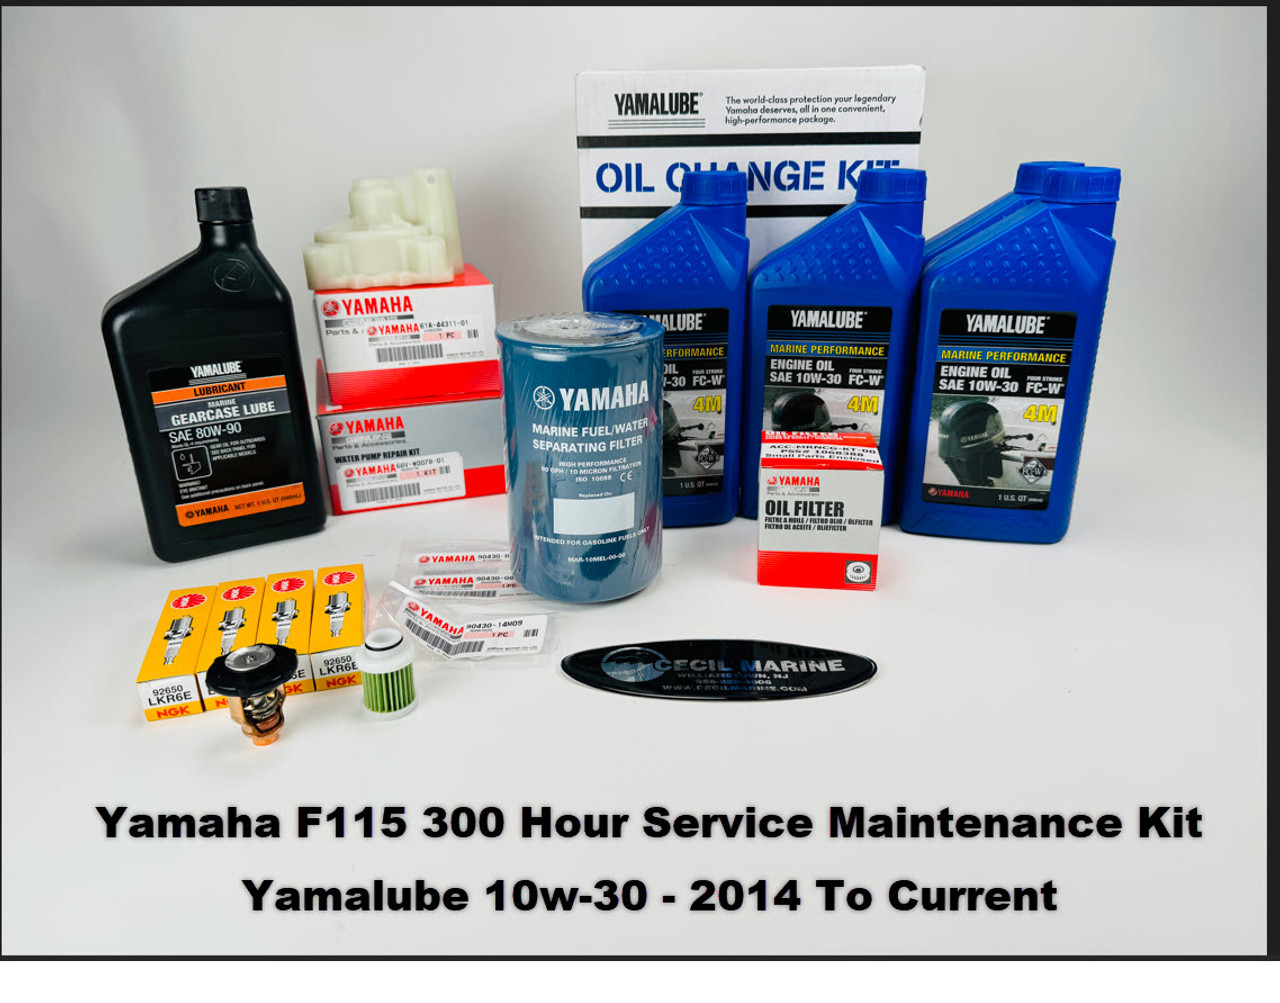 $310.99* GENUINE YAMAHA no tax* YAMAHA F115 300 HOUR SERVICE 10W-30 MAINTENANCE KIT 2014 TO CURRENT *In Stock & Ready To Ship!